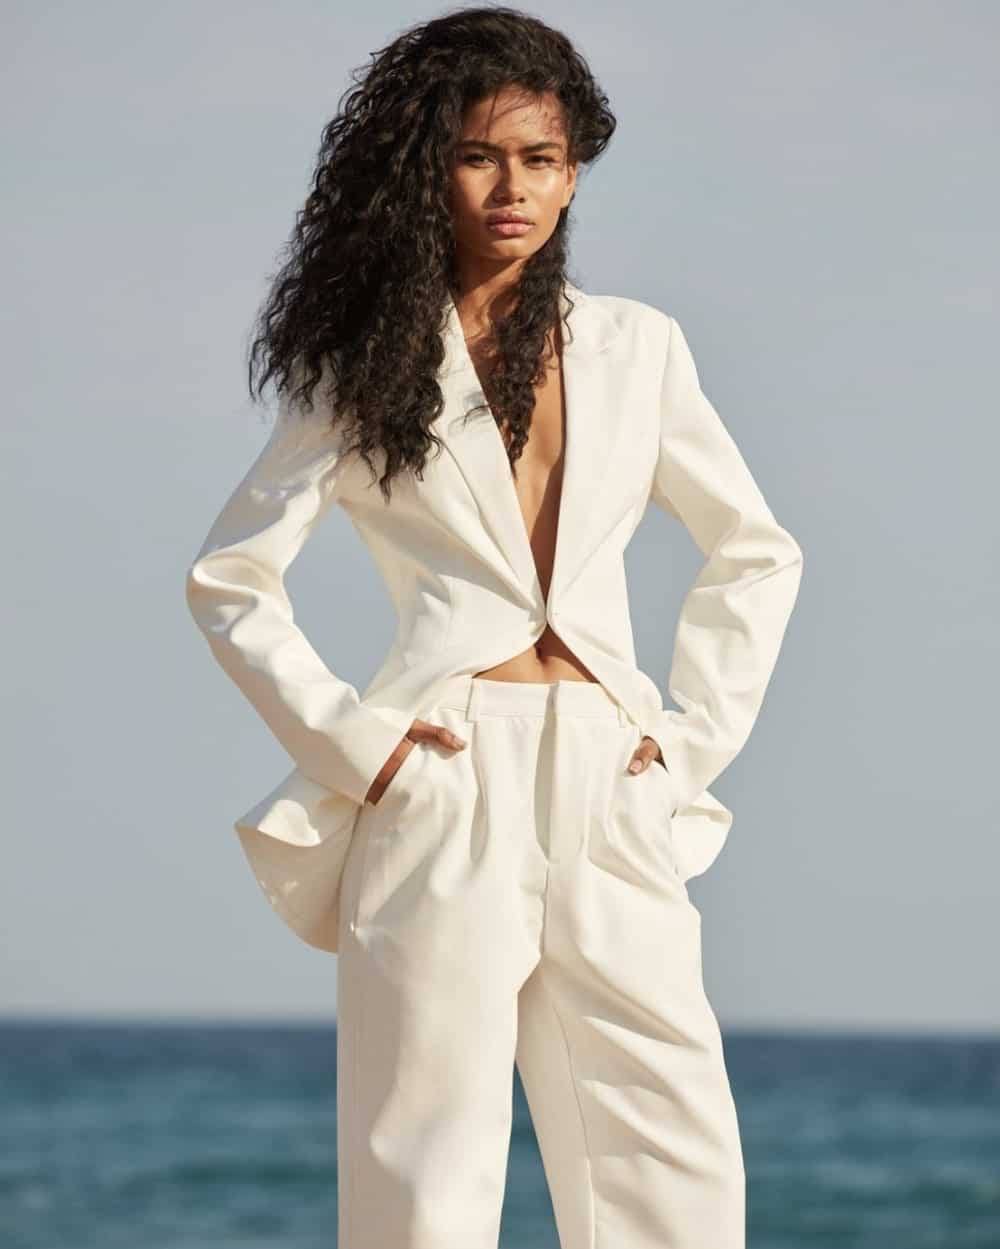 Woman wearing an all white suit.